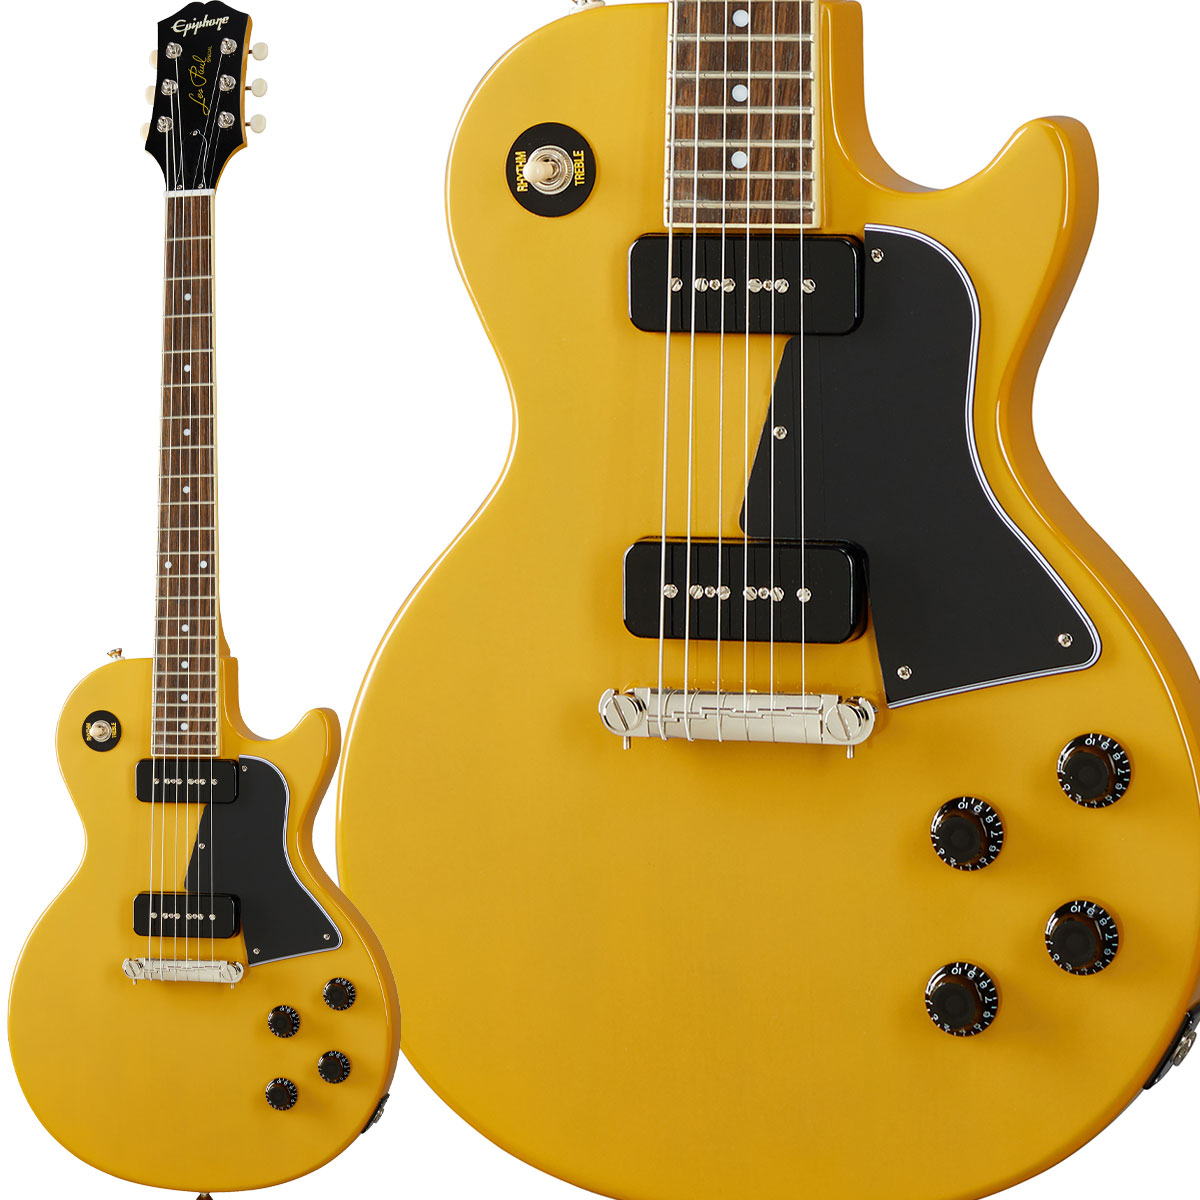 Epiphone  Les Paul Special TV Yellow エピフォン 【 久留米ゆめタウン店 】